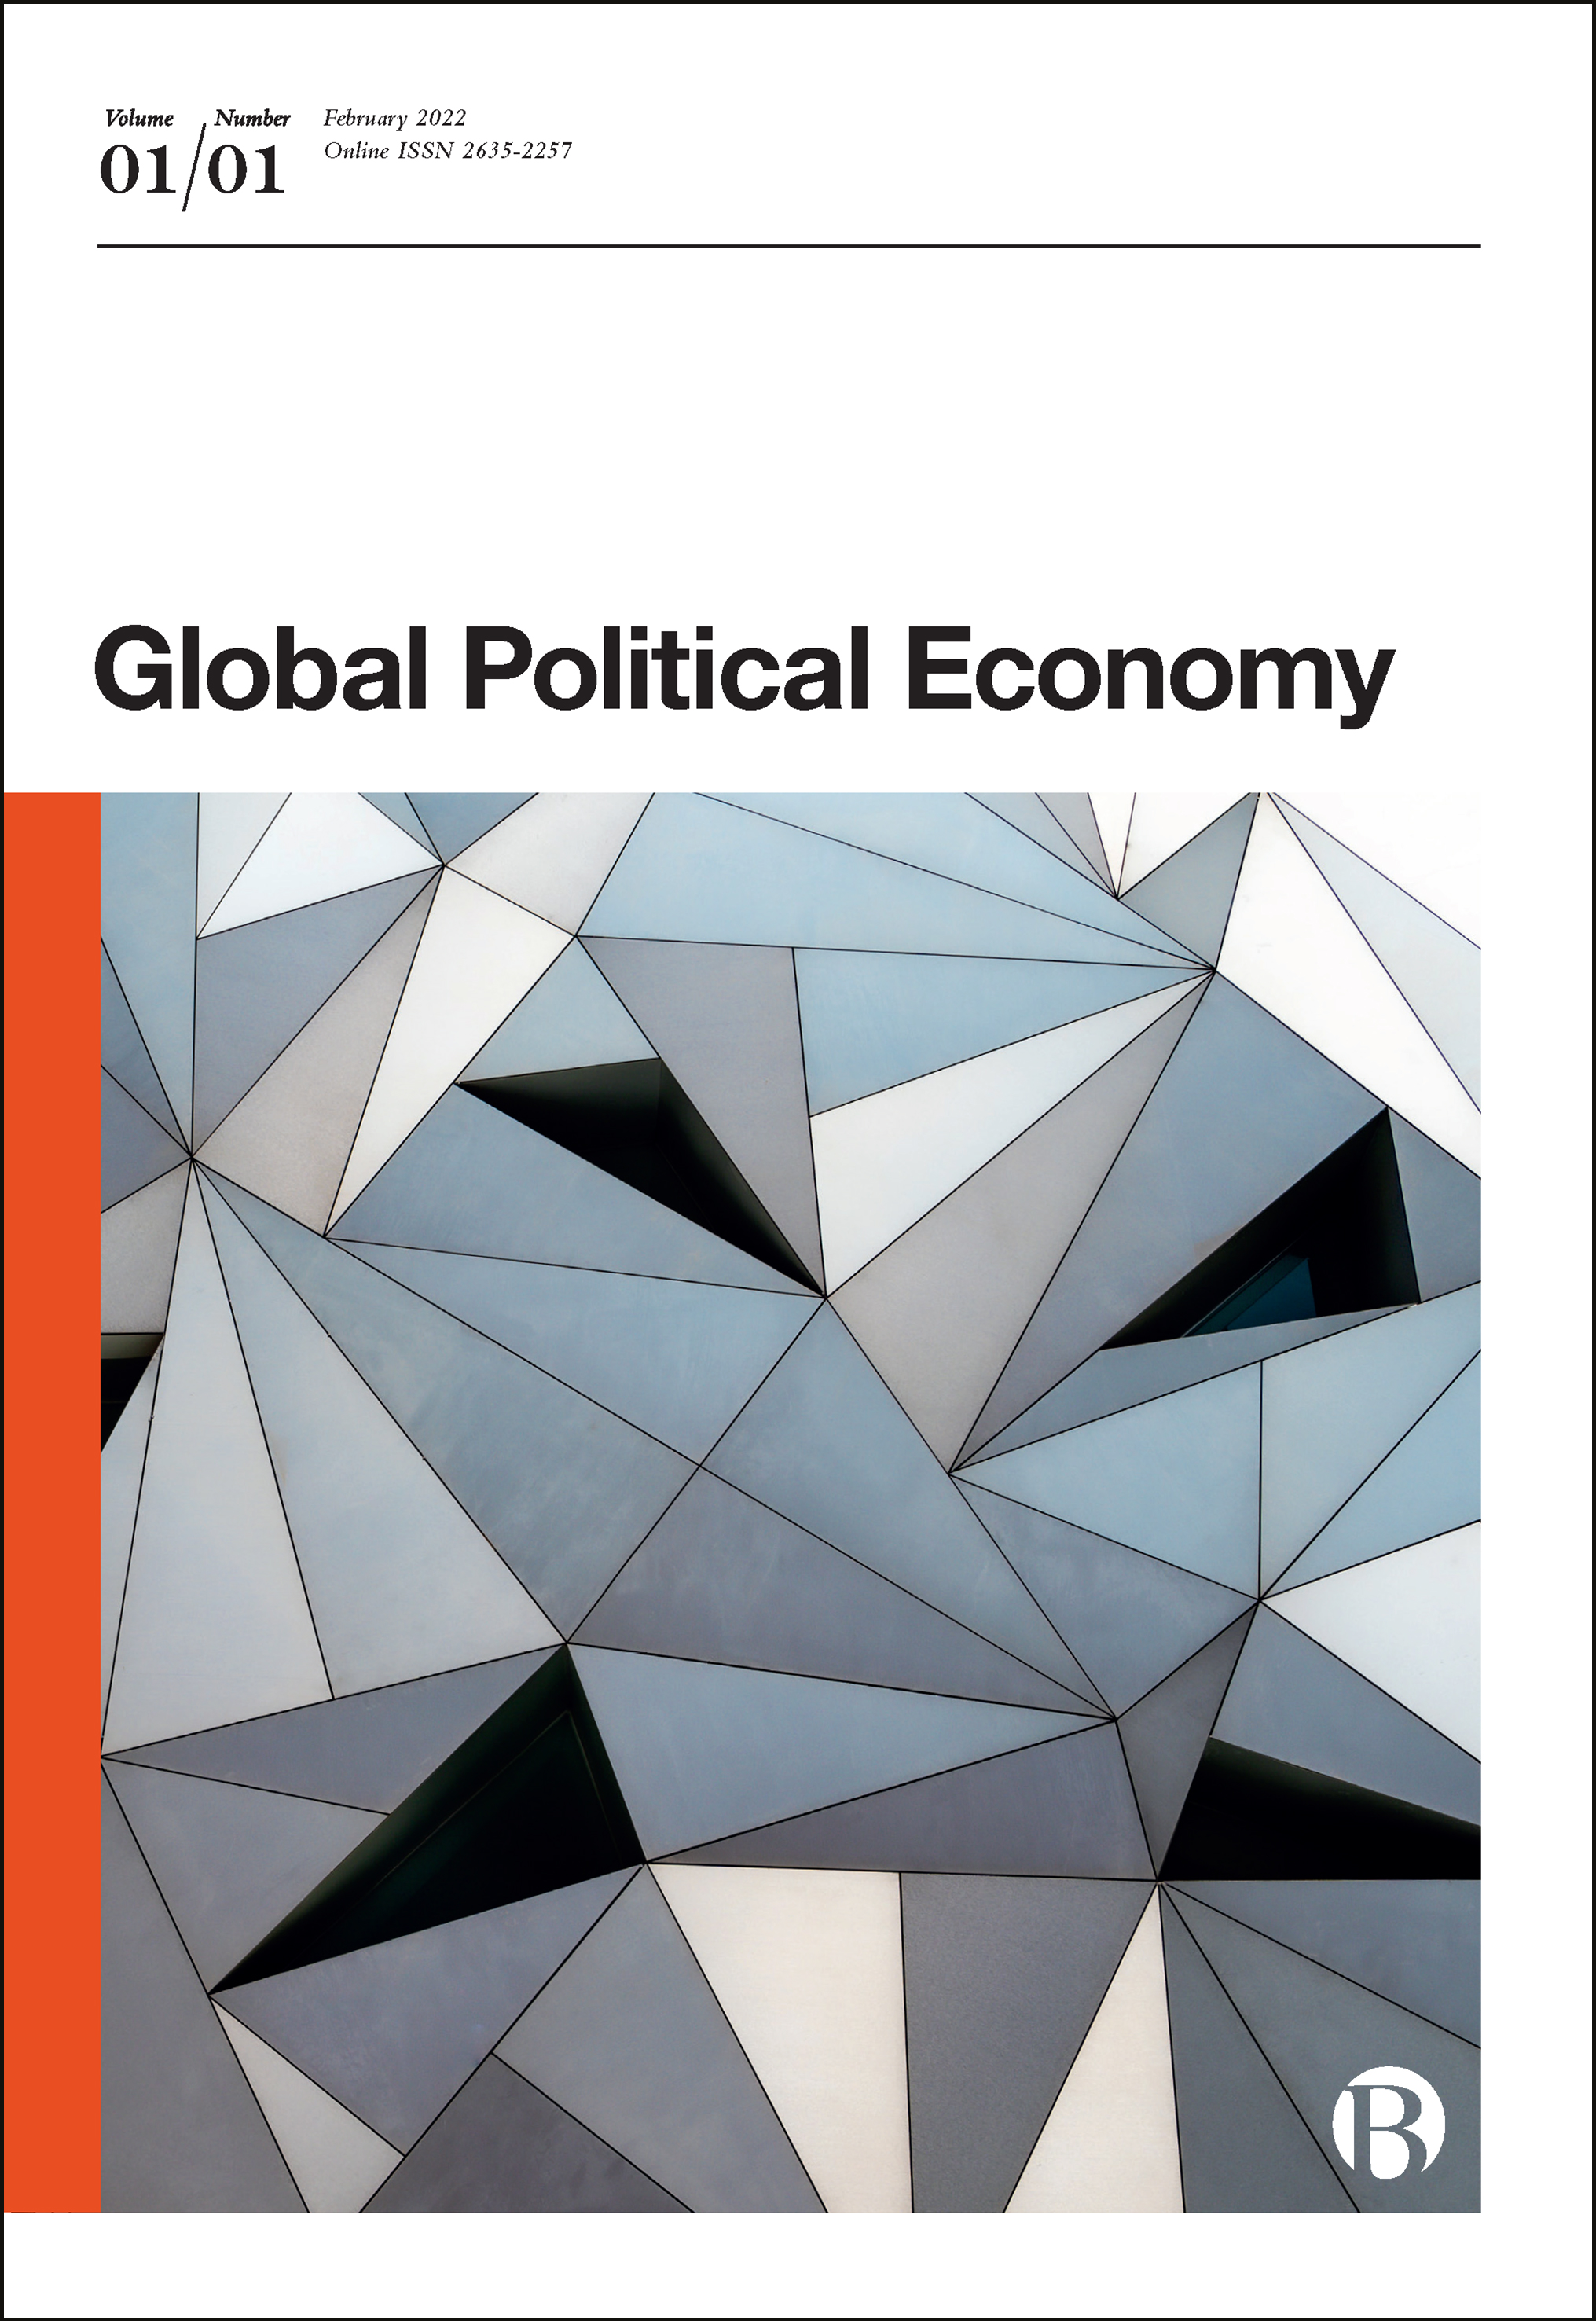 Coming in 2022: Global Political Economy